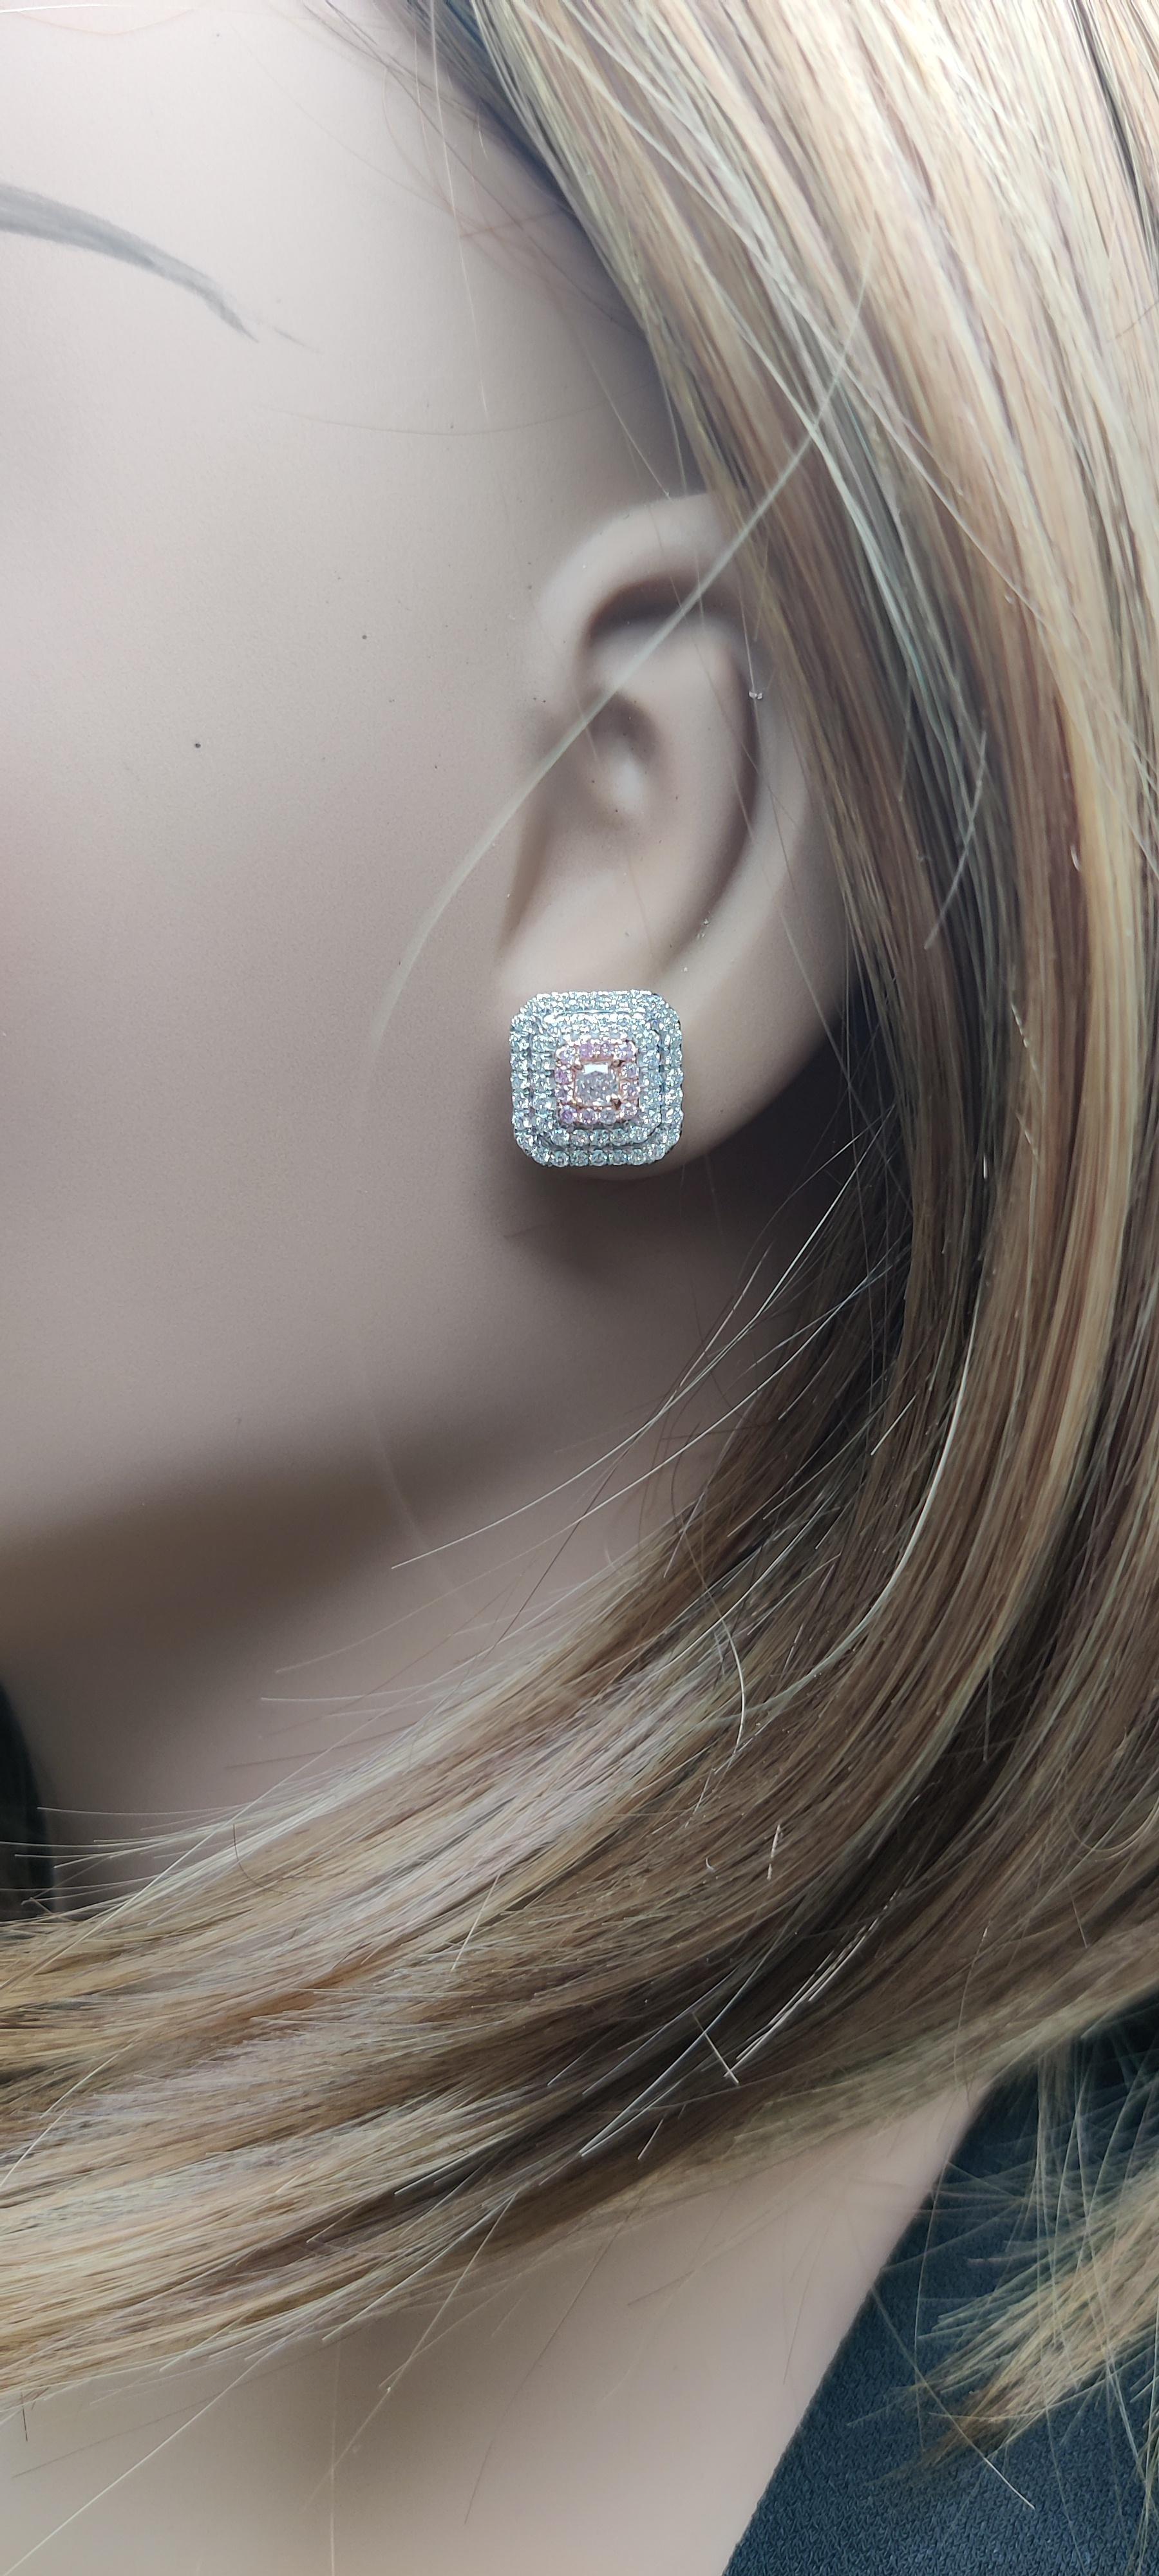 RareGemWorld's classic GIA certified diamond earrings. Mounted in a beautiful 18K Rose and White Gold setting with natural radiant cut pink diamonds. The pink diamonds are surrounded by round natural pink diamond melee and round natural white